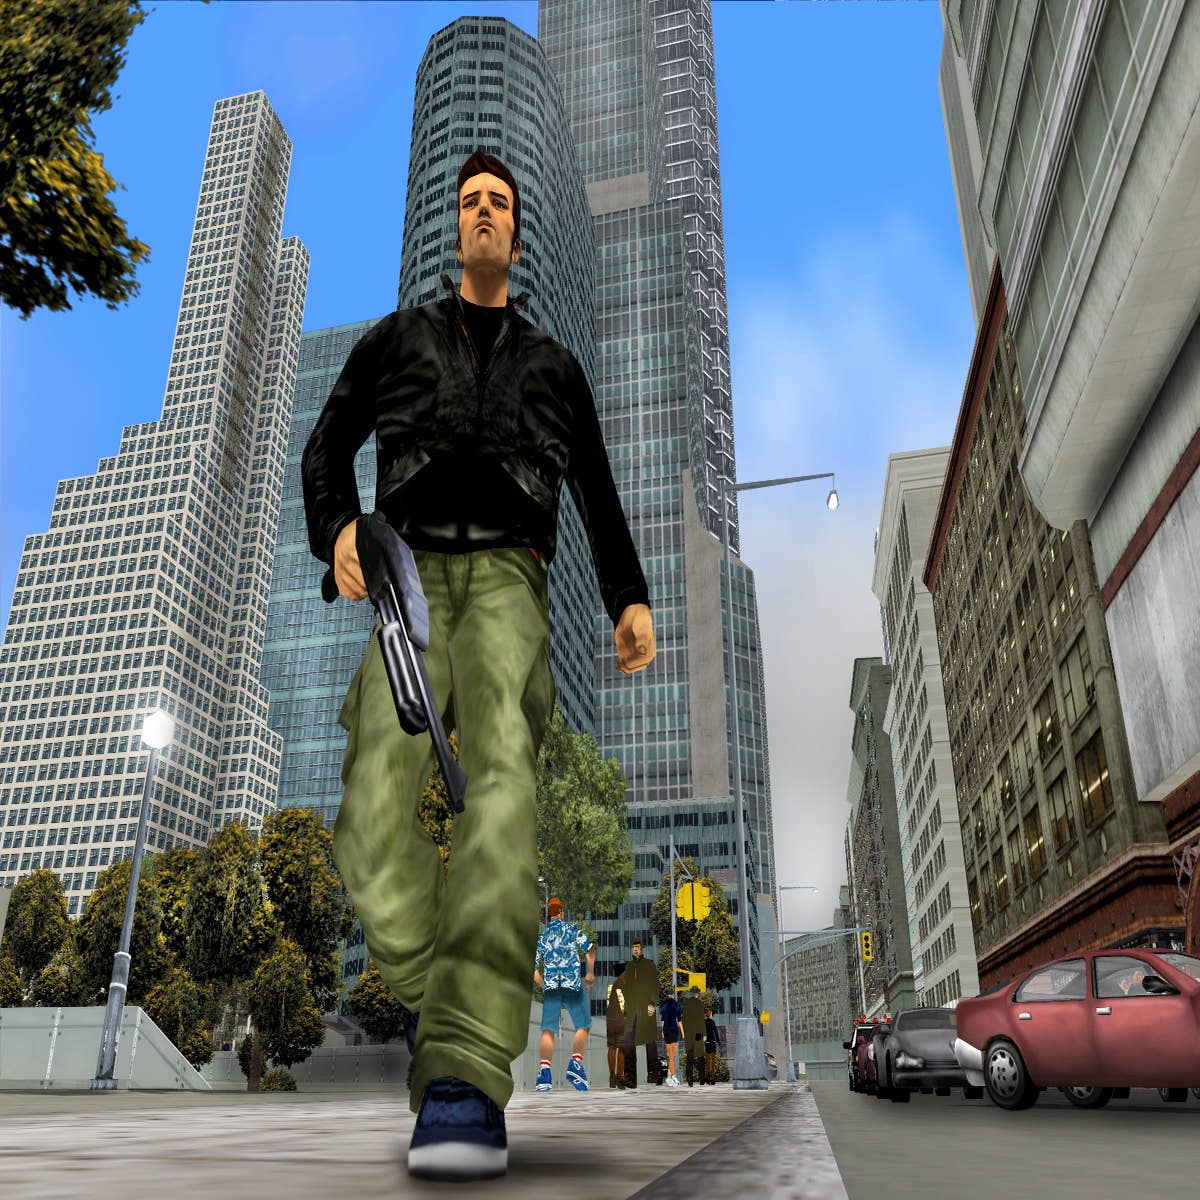 Grand Theft Auto III: 8 Things You Didn't Know About The Game's Development